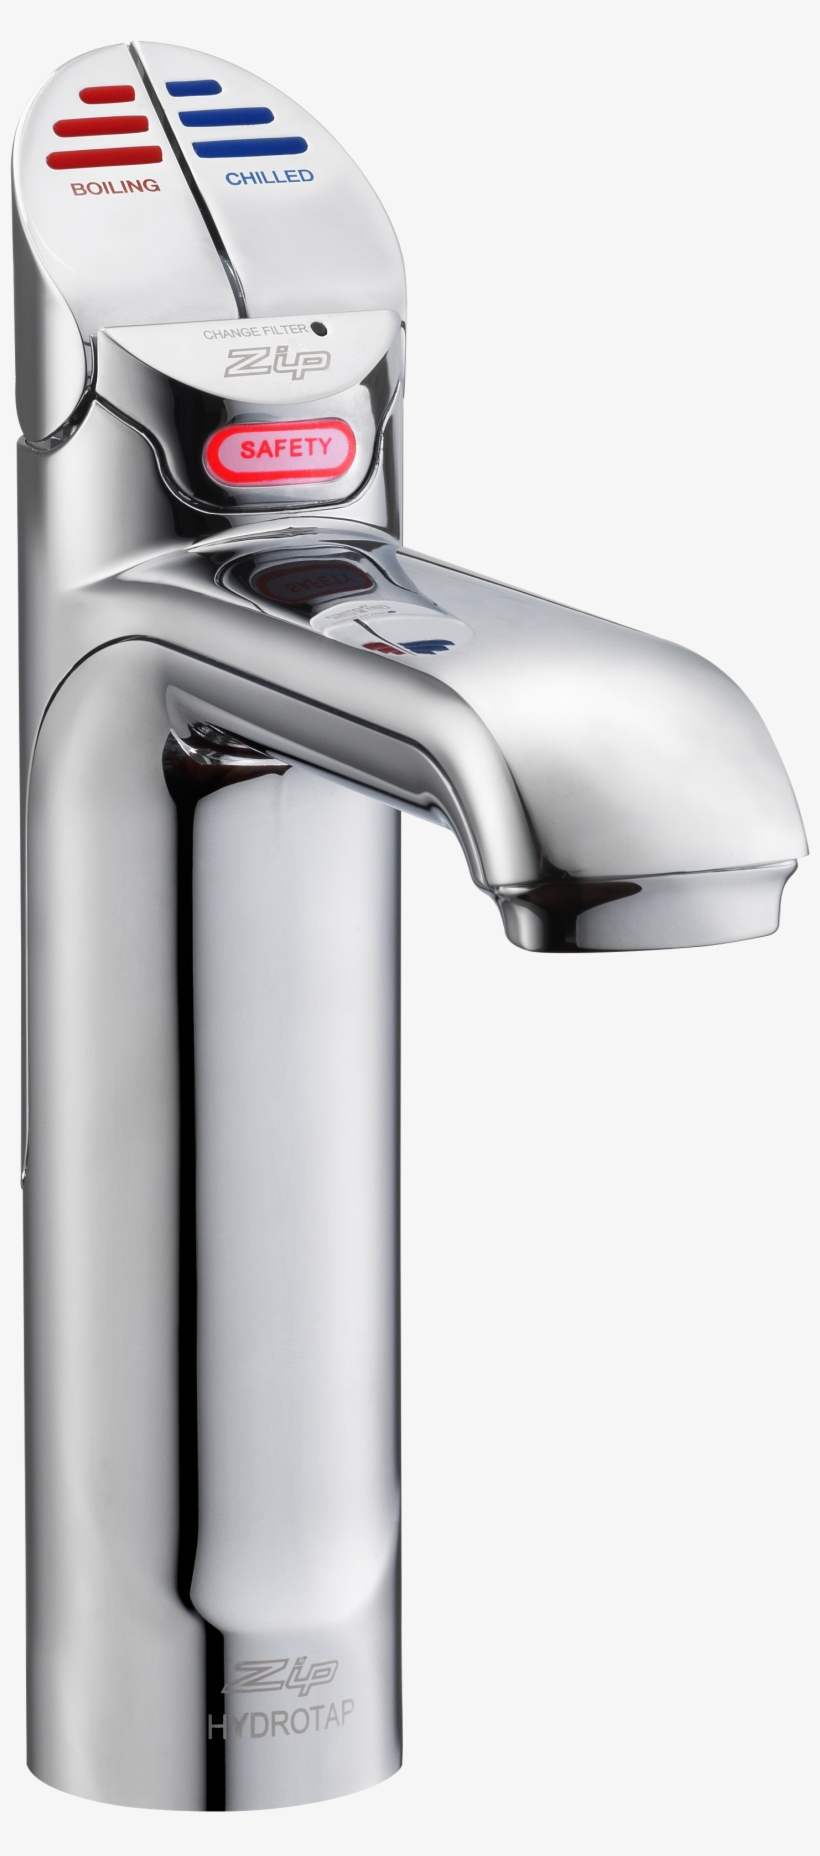 Water Tap Png - Boiling Hot Water Tap, transparent png #2860449